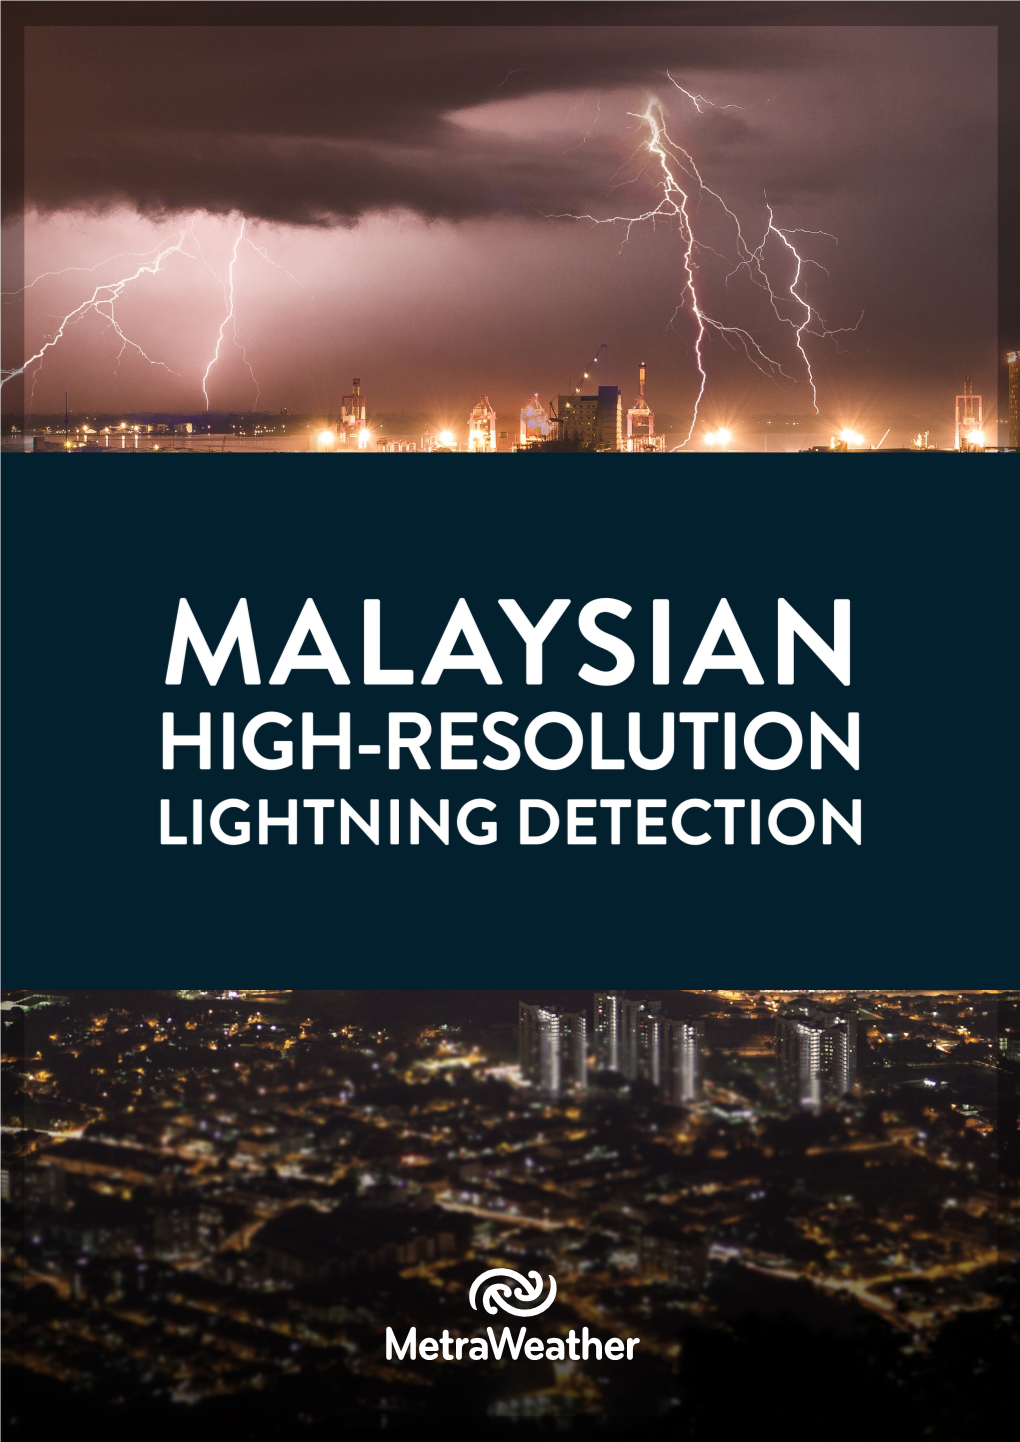 The Toa Systems Malaysian Lightning Detection Network